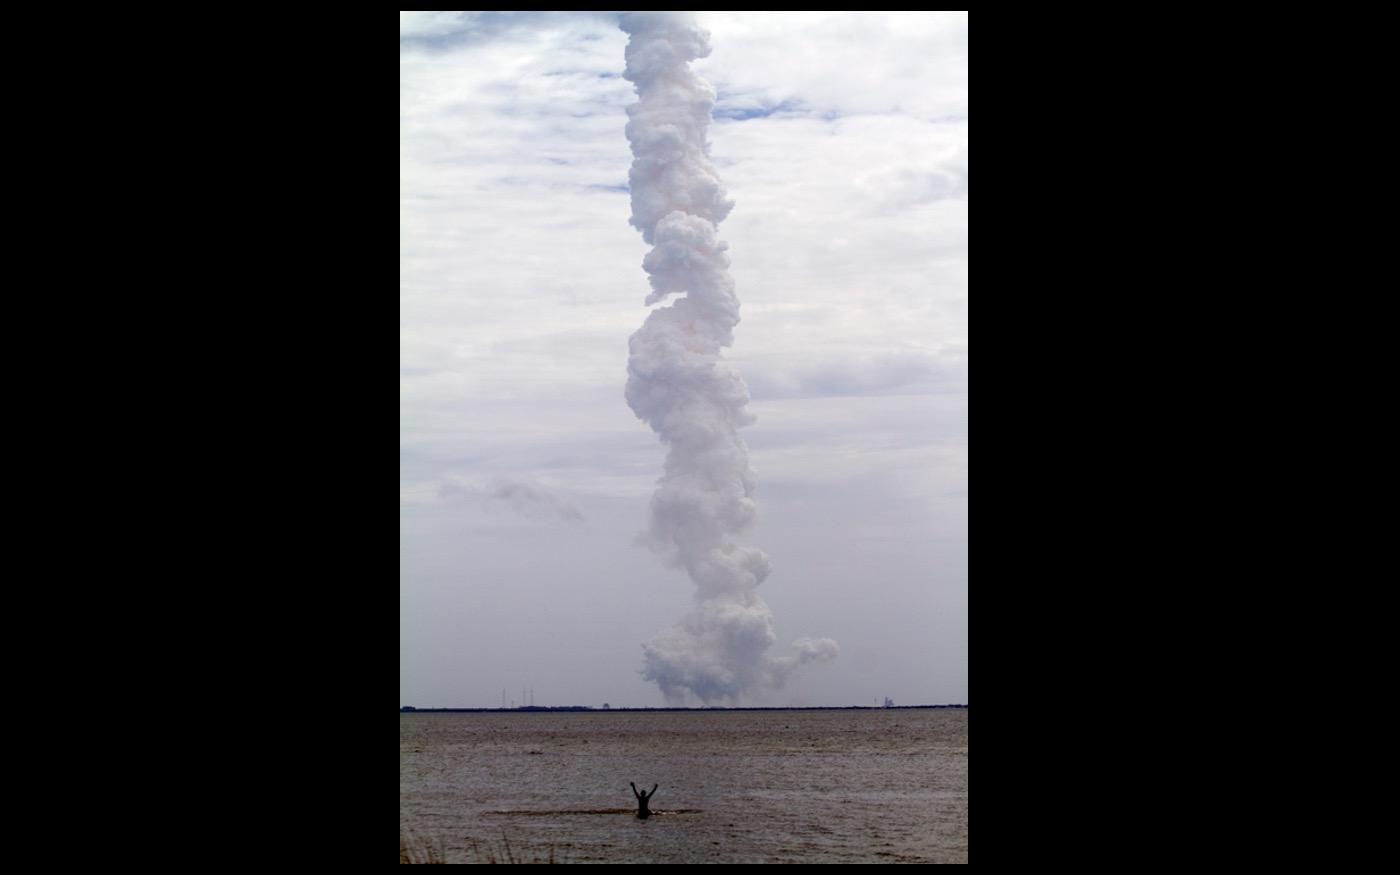 The launch contrail of the last Space Shuttle  2011 : Looking Back: 60 Years of Photographs : David Burnett | Photographer